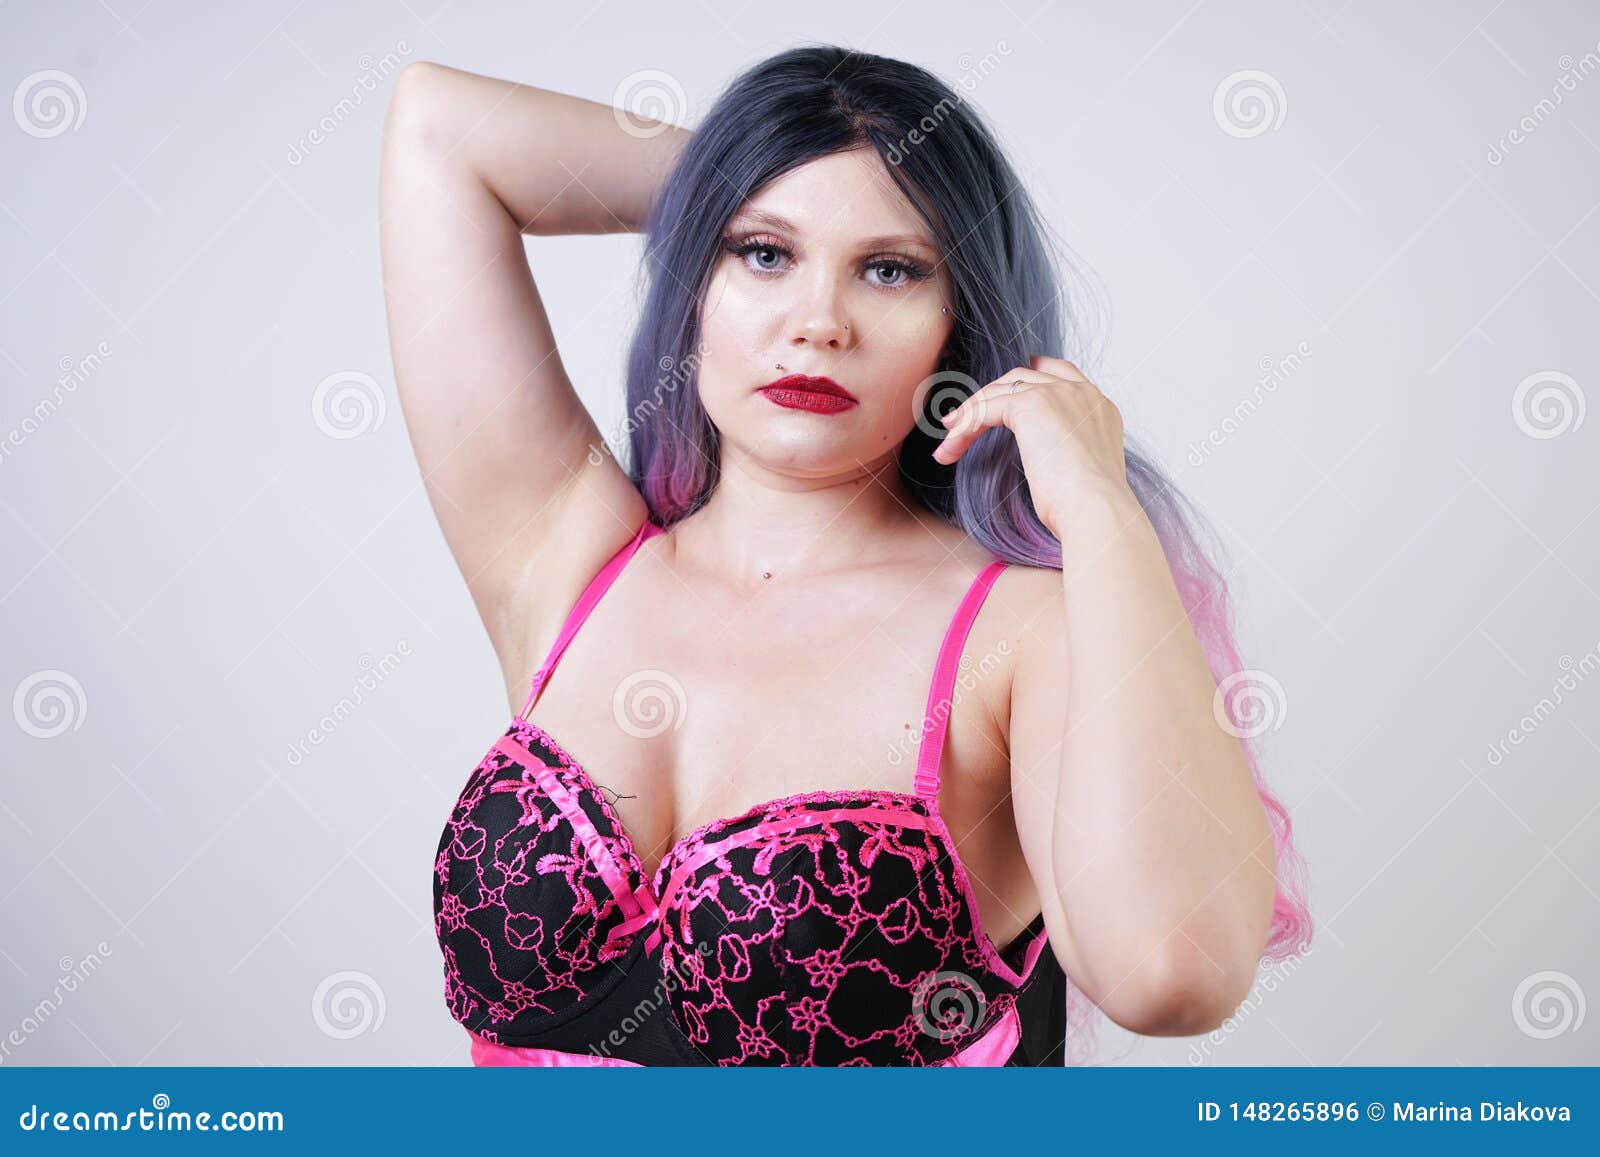 Cute Pretty Chubby Lady Wearing Sexual Babydoll Lingerie Dress on White Studio Background Stock Photo photo picture